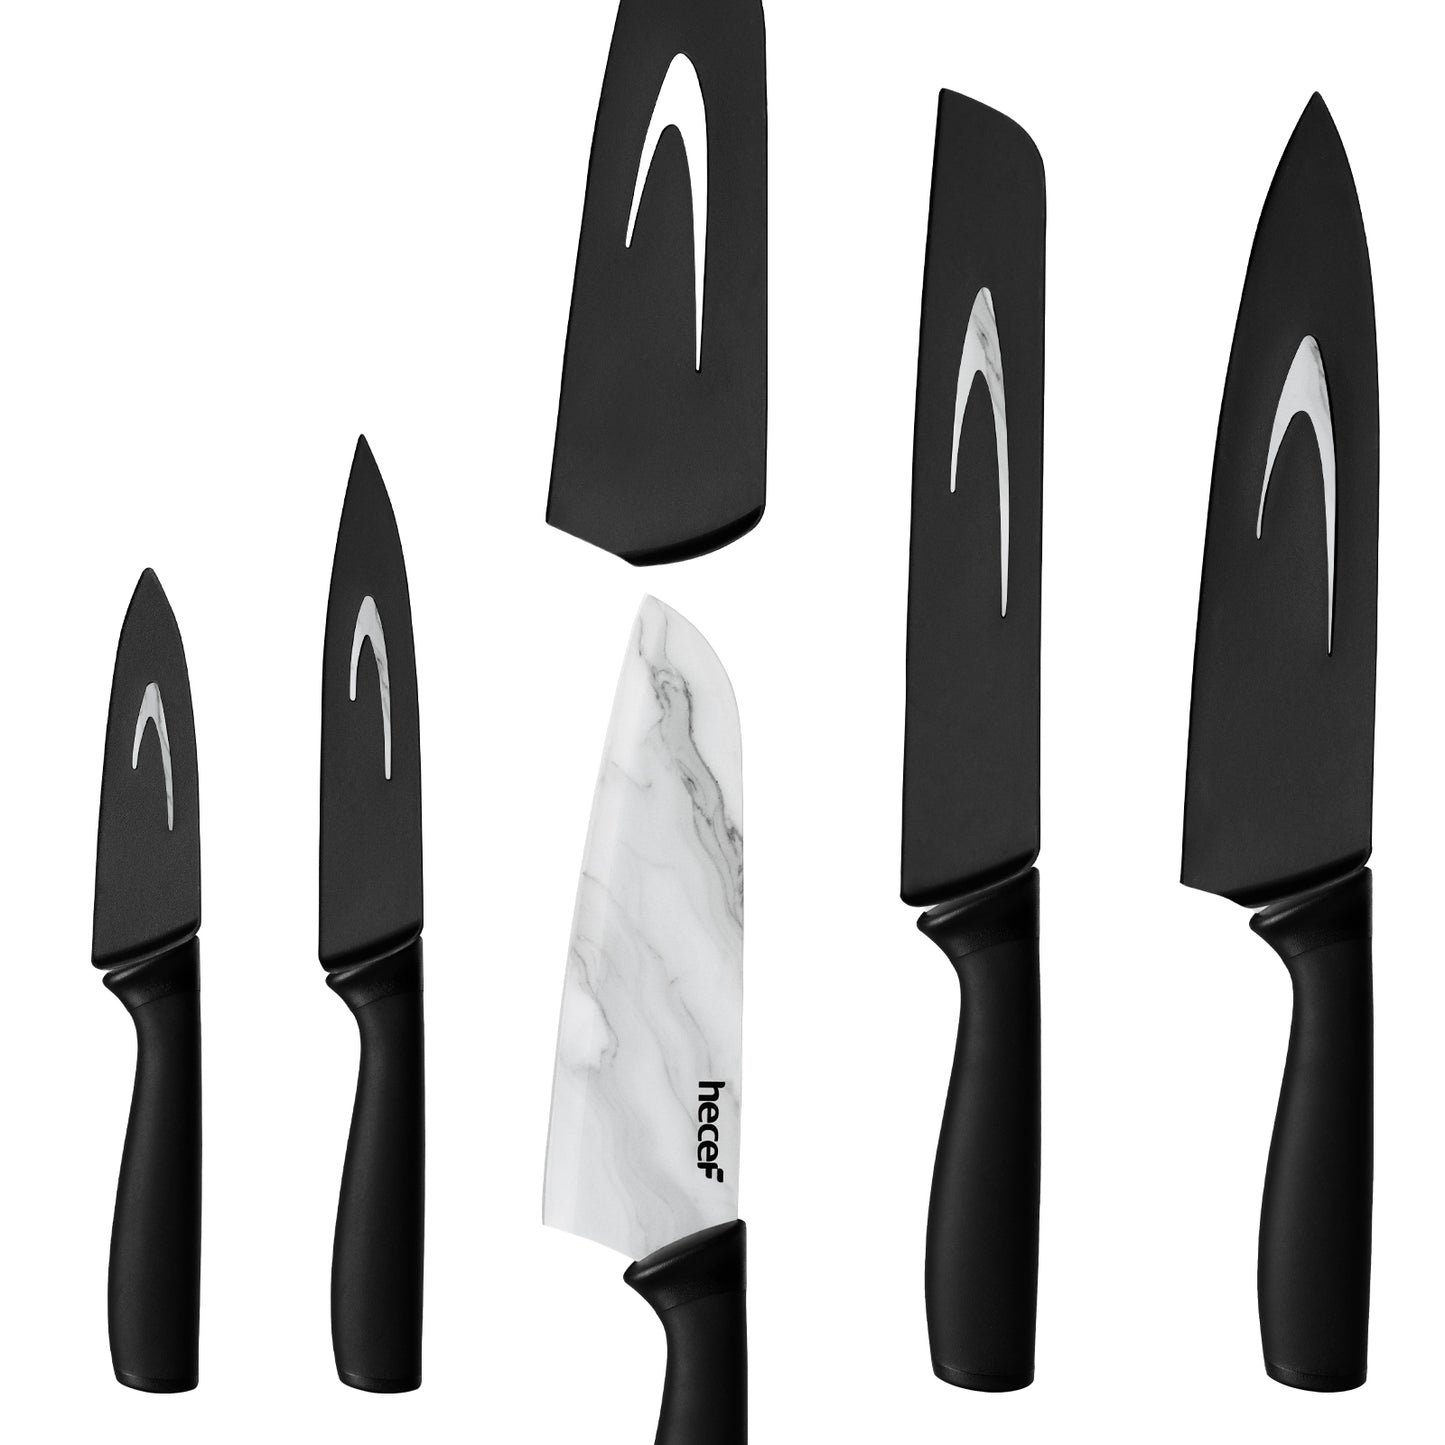 Kitchen Knife Set with Marble Pattern, Non-stick Ceramic Coated Stainless Steel Blades with Protective Sheaths, Professional Chef Knife Set for Kitchen, Restaurant, Camping - Hecef Kitchen